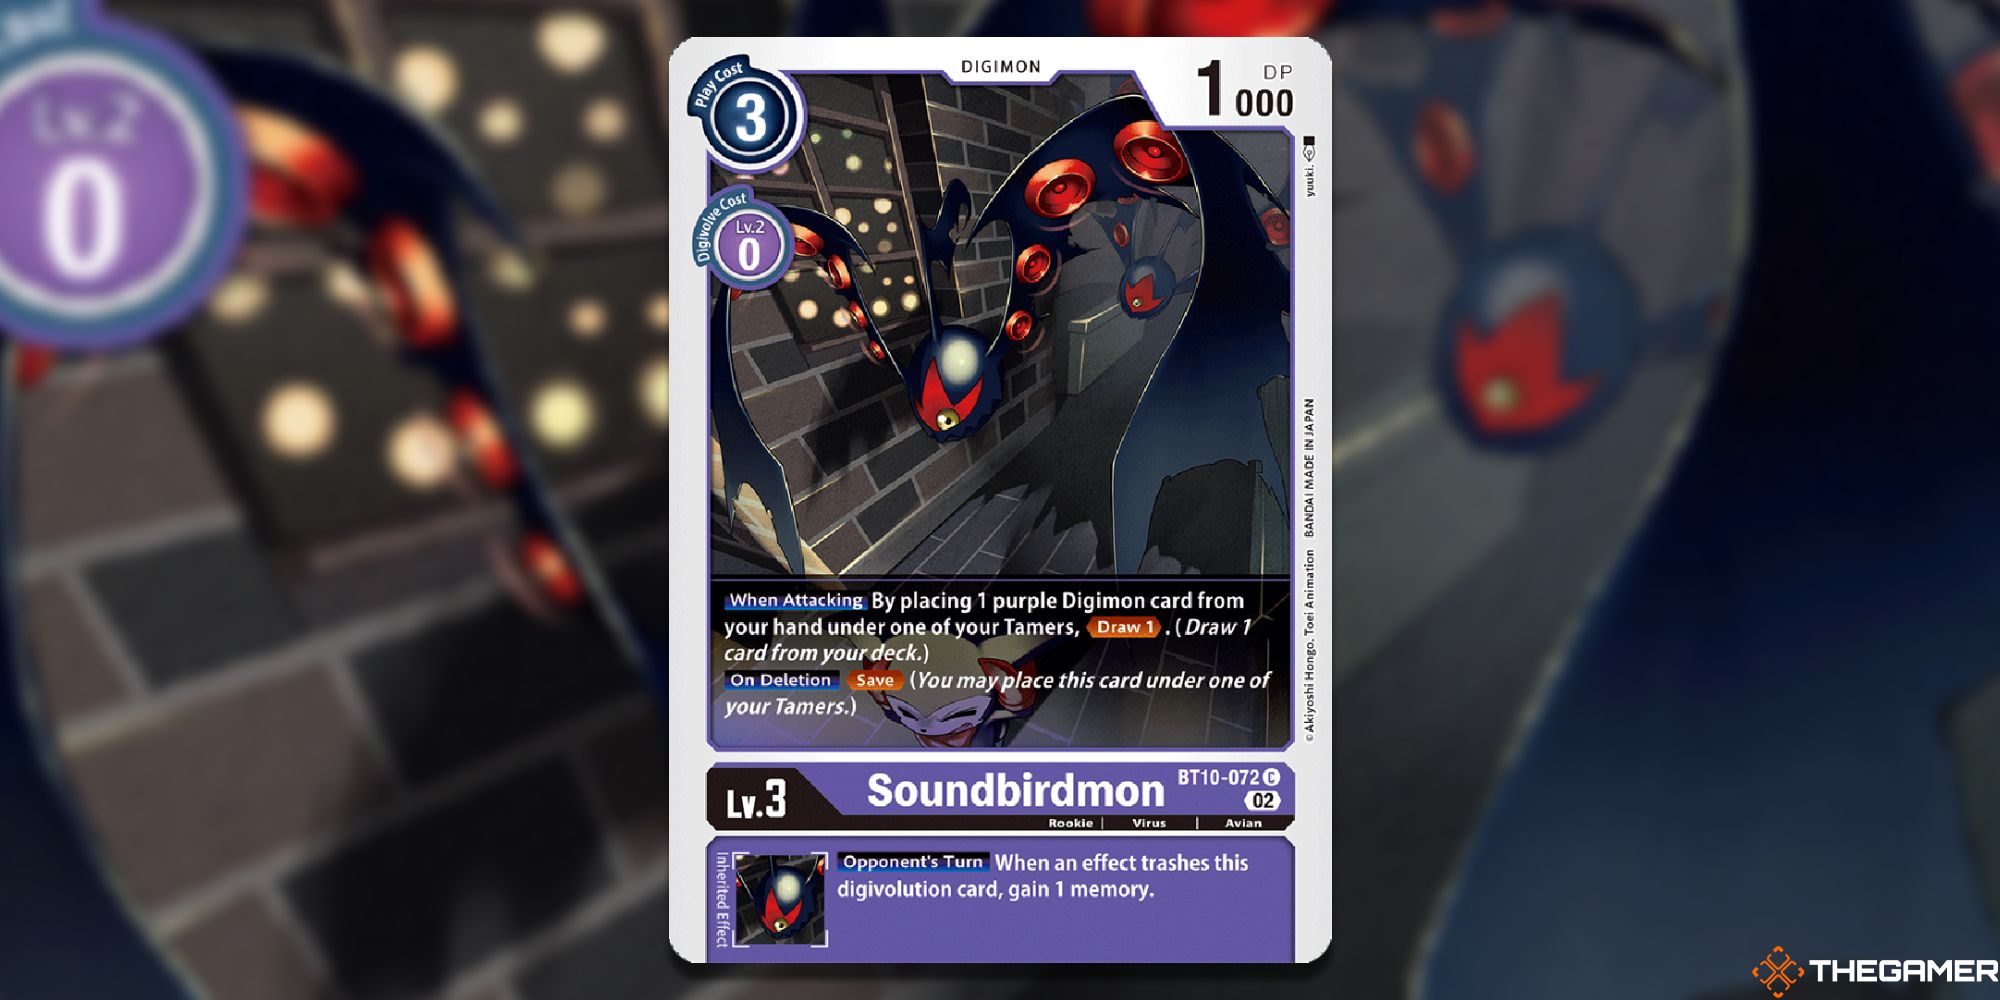 soundbirdmon image with blur from digimon card game